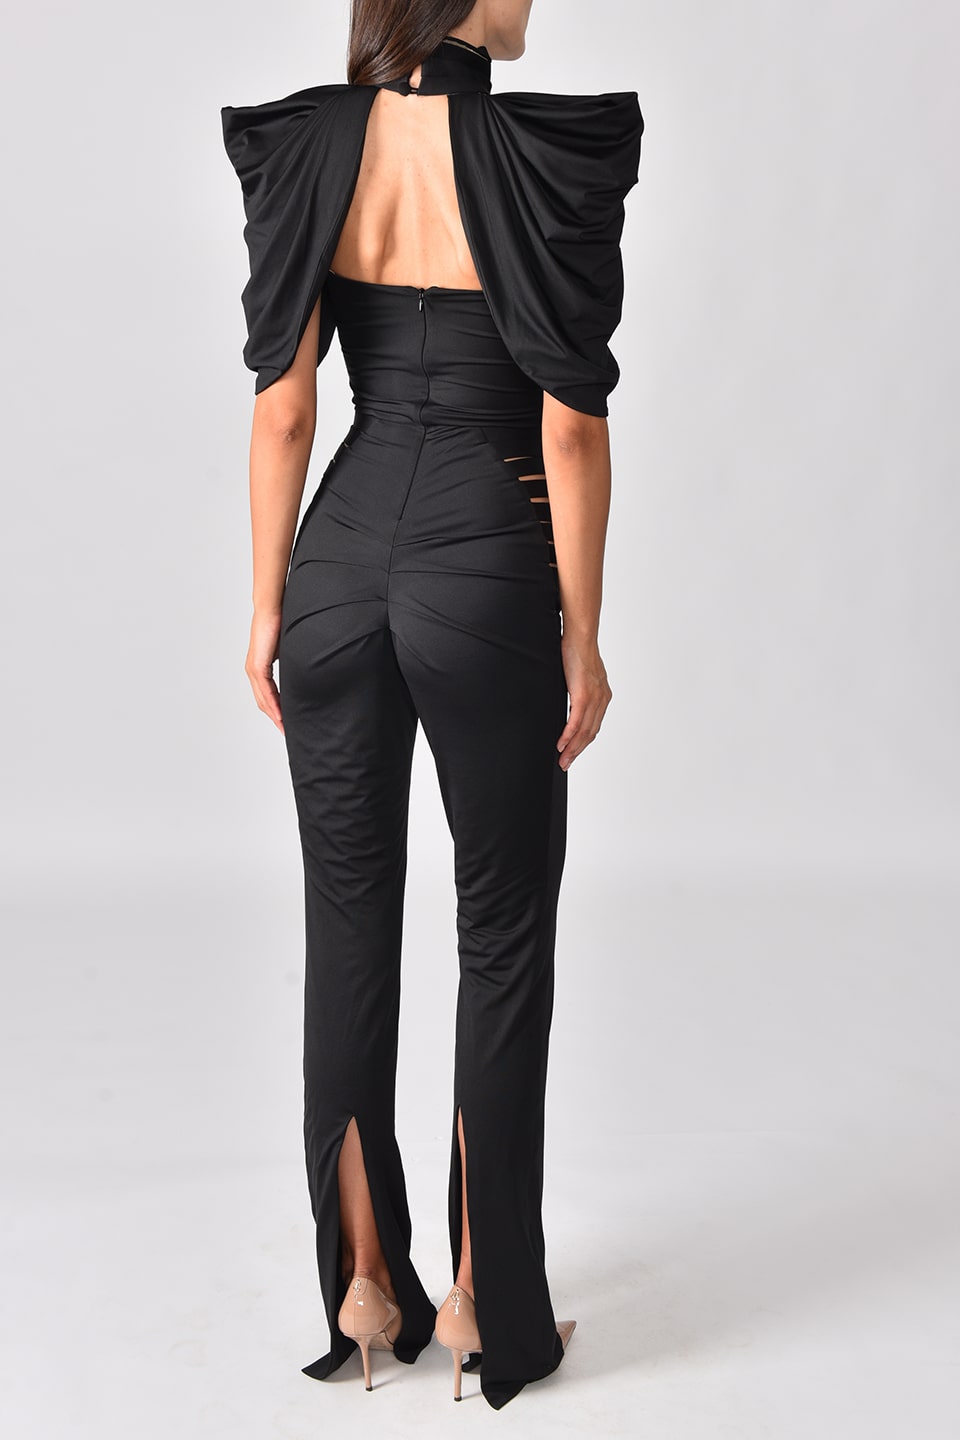 Fashion designer jumpsuit for special occasions, in black color and stretchy material. behind detail view